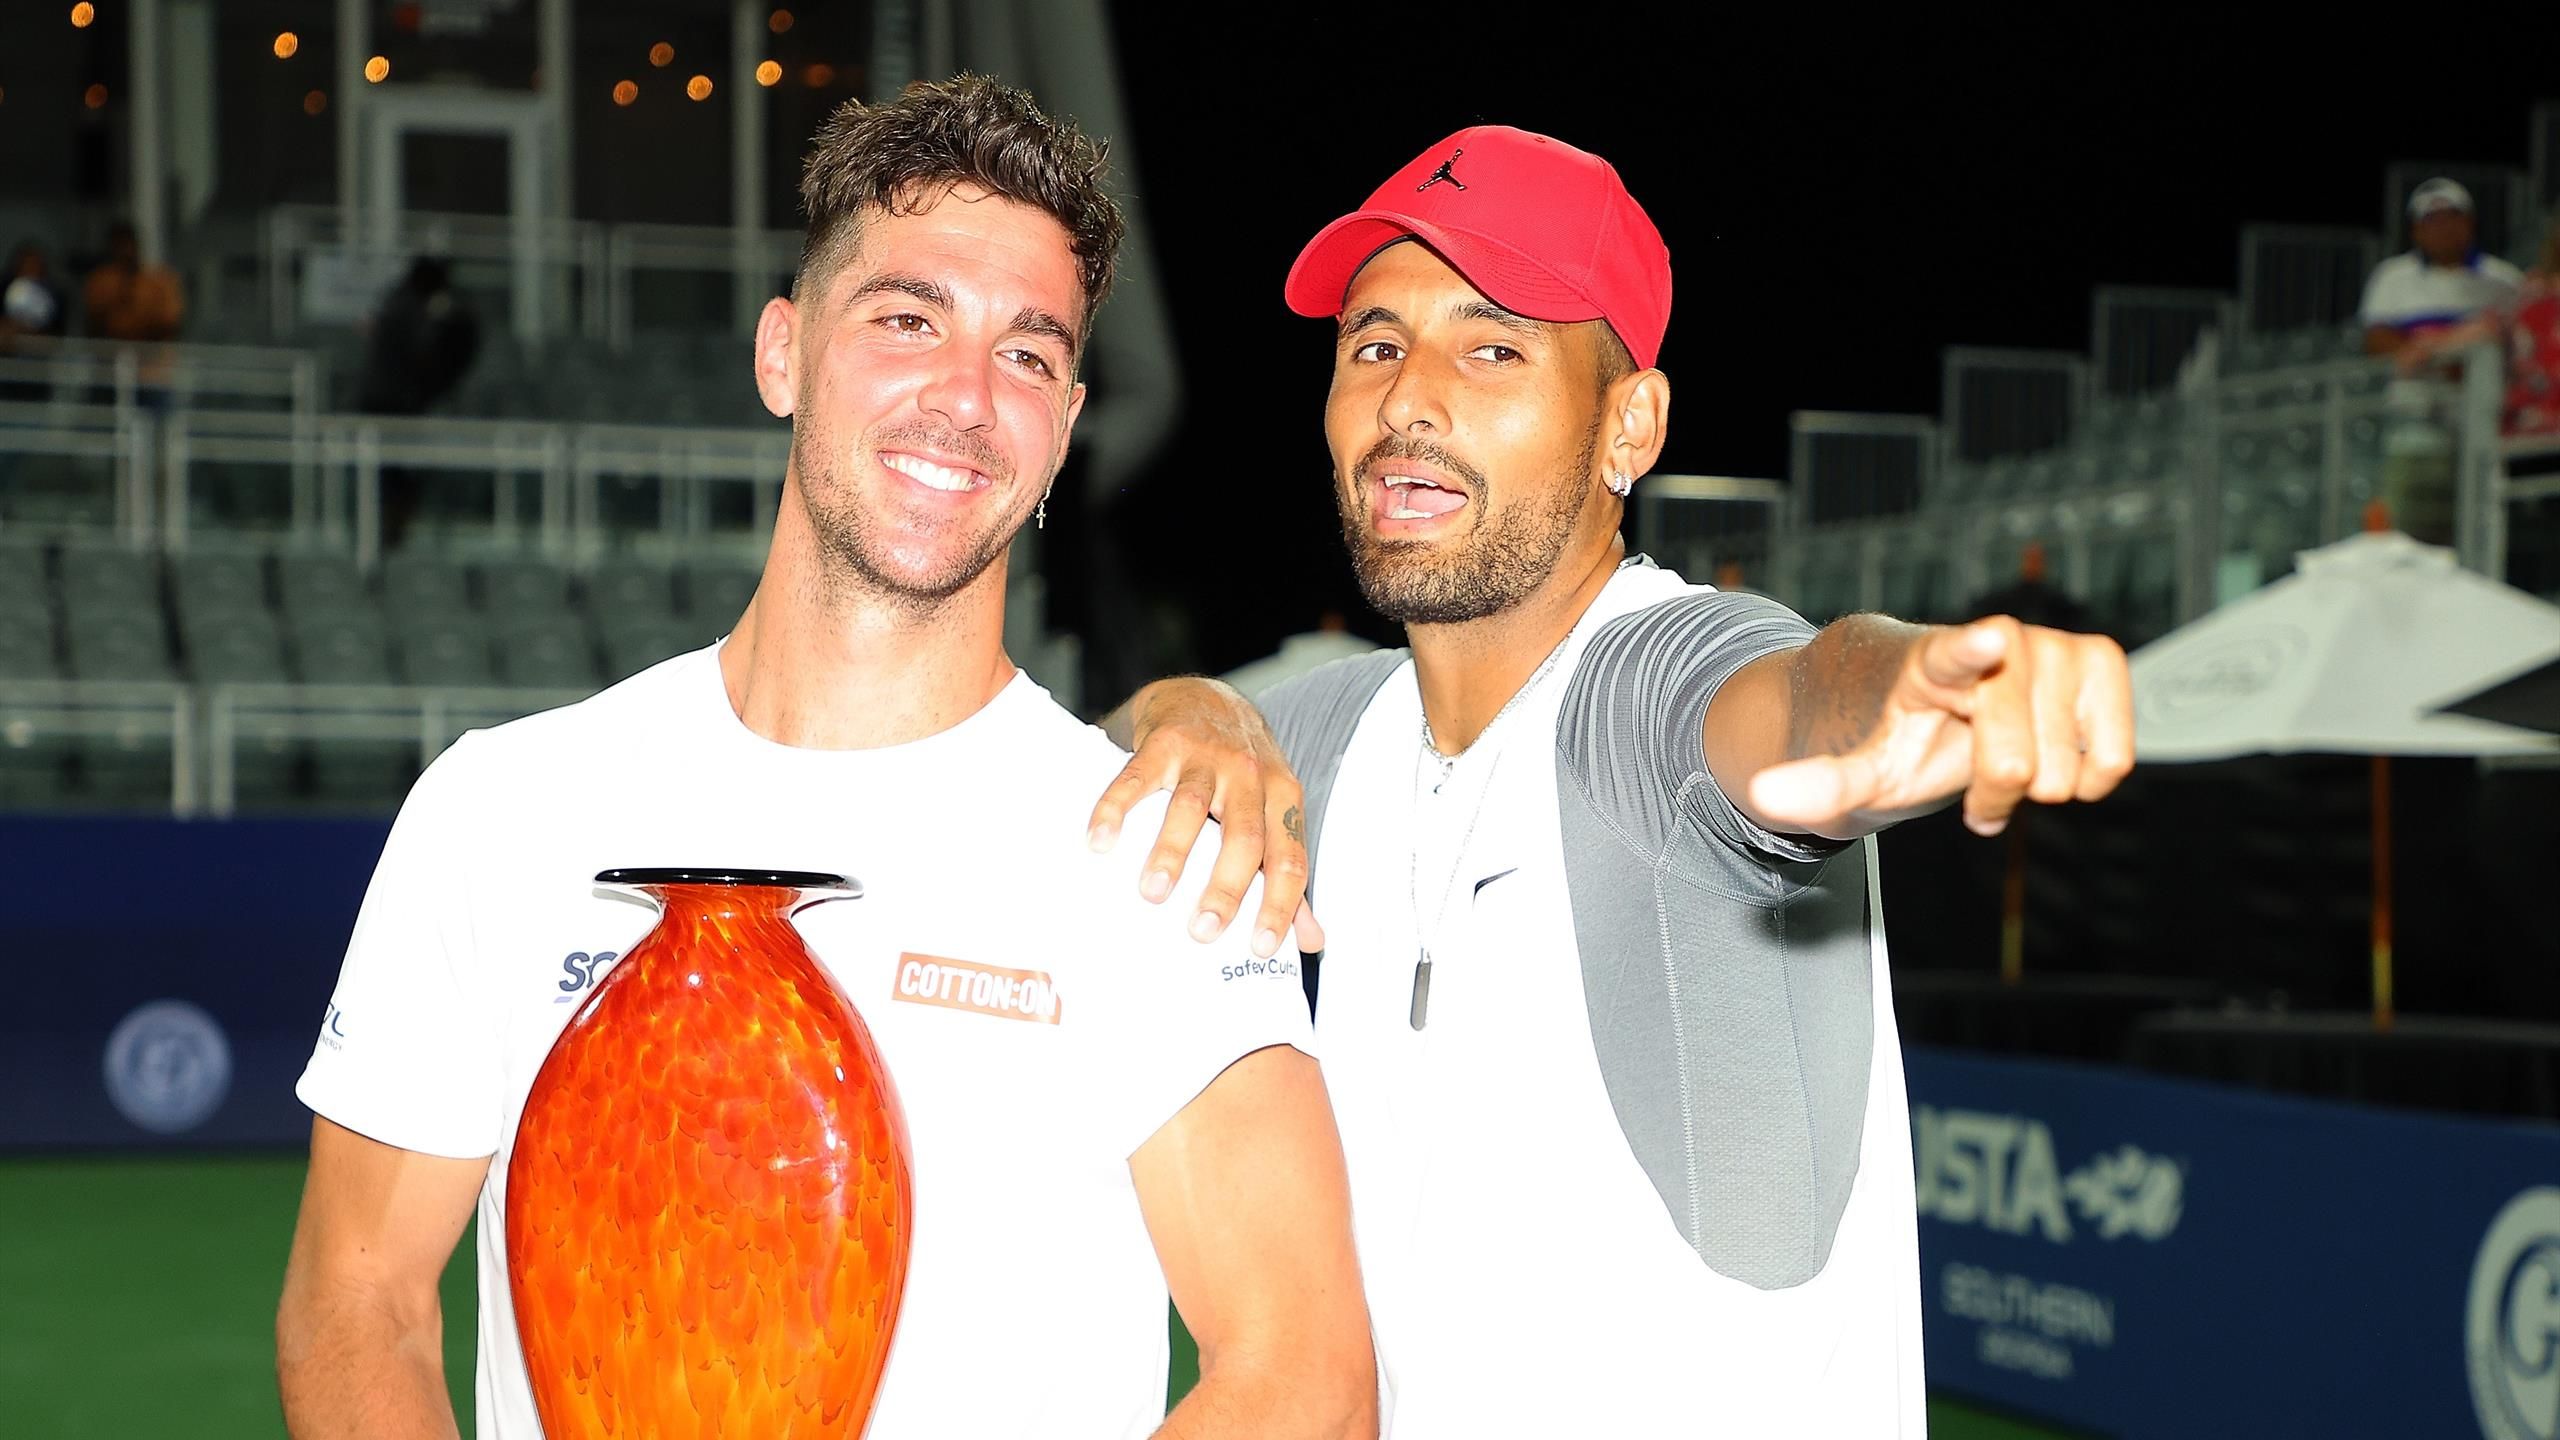 He lives in the chaos - Thanasi Kokkinakis on facing and partnering with fellow Special K Nick Kyrgios at US Open